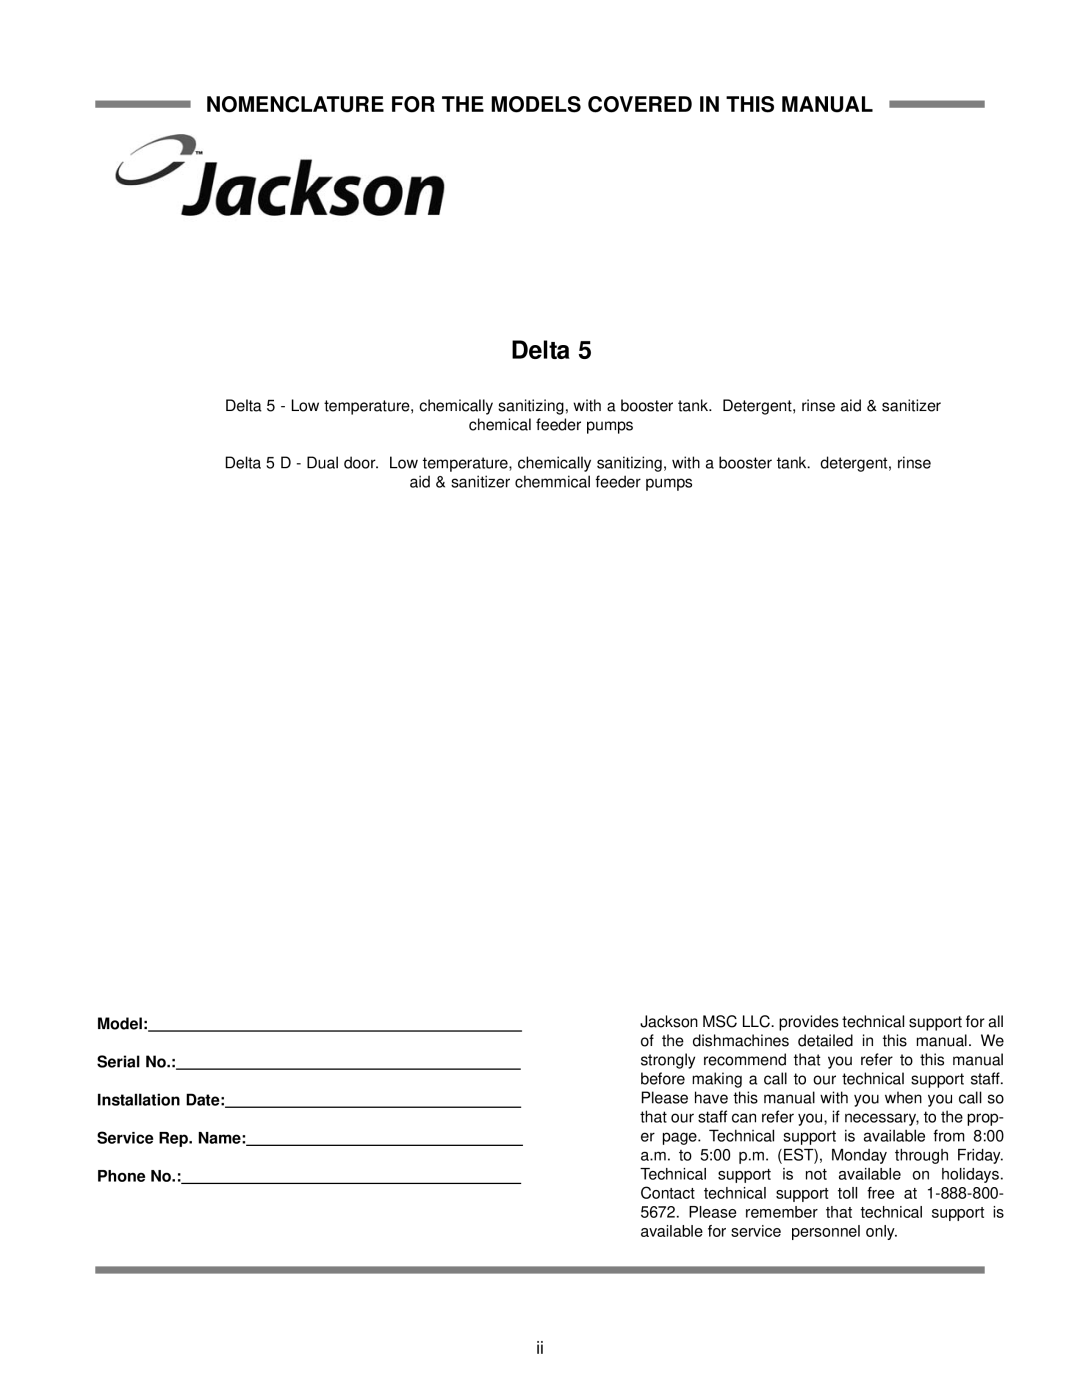 Jackson DELTA 5 D, Delta 5 technical manual Nomenclature For The Models Covered In This Manual 